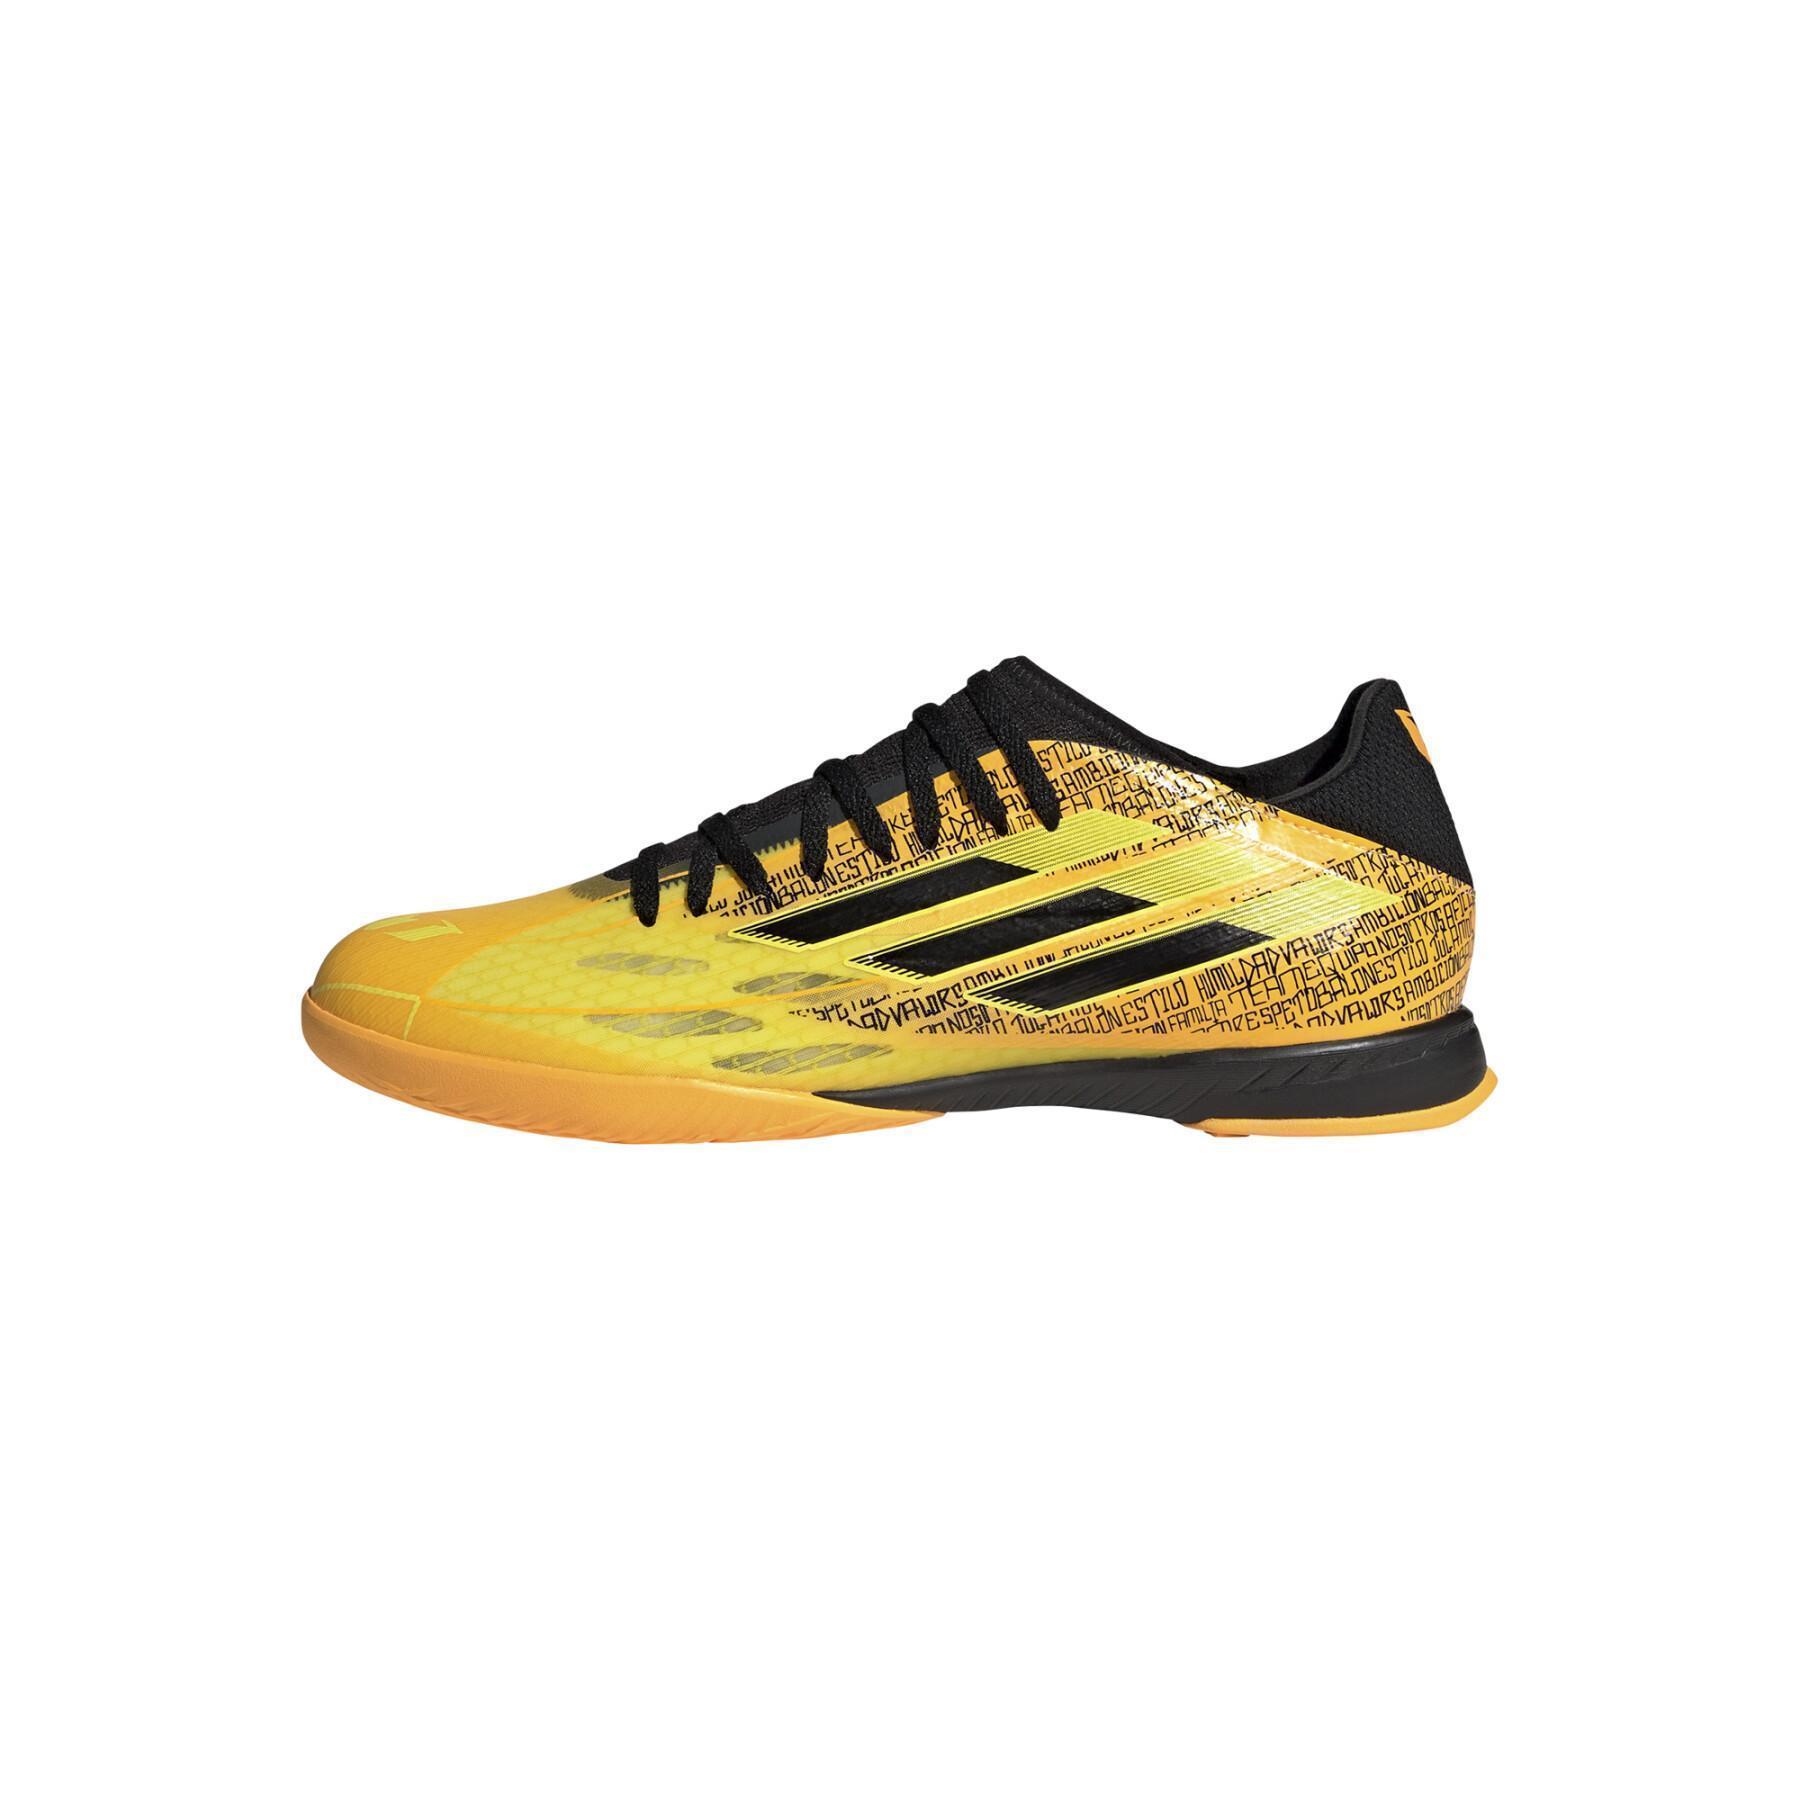 Soccer shoes adidas X Speedflow Messi.3 IN